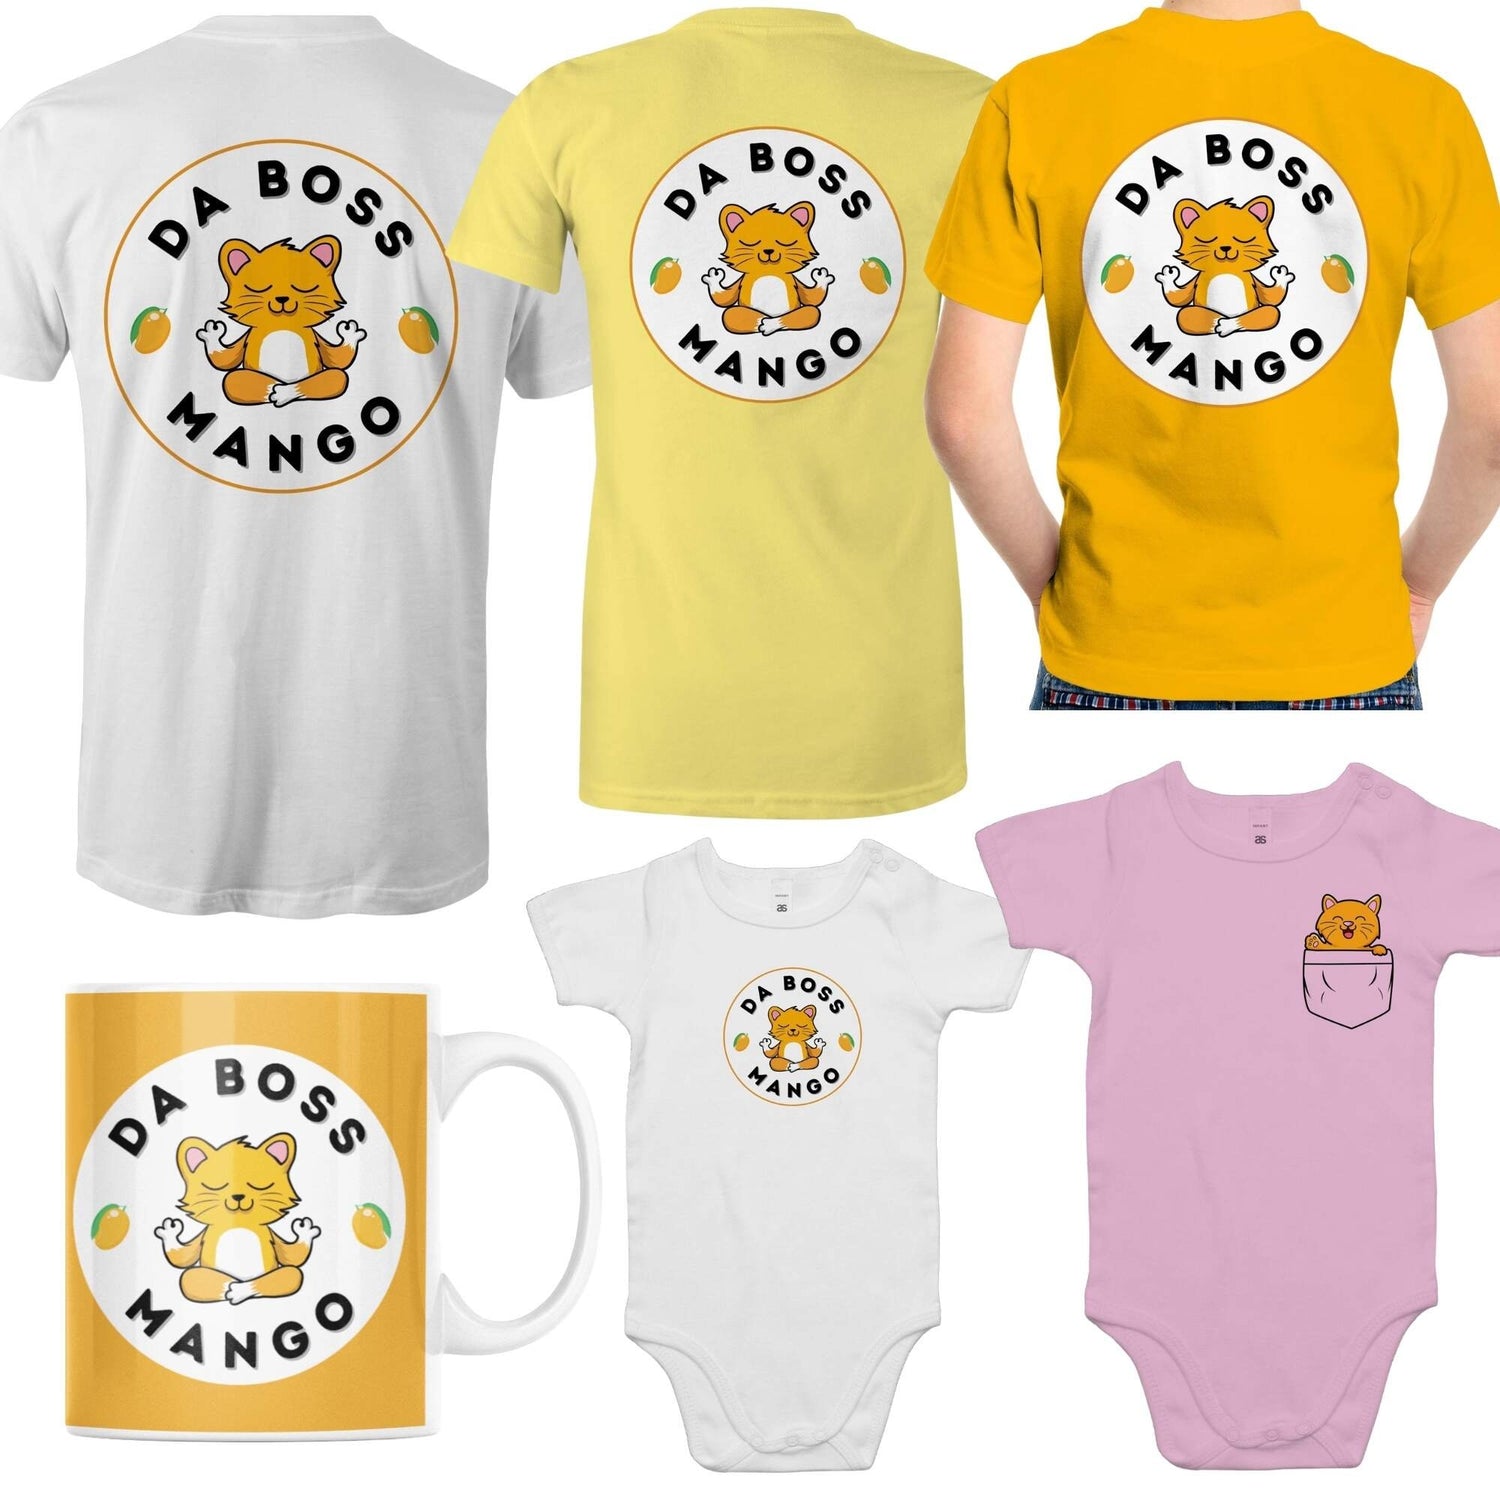 Da Boss Mango T-shirts for men, women and kids, baby rompers and a mug with our brand logo.